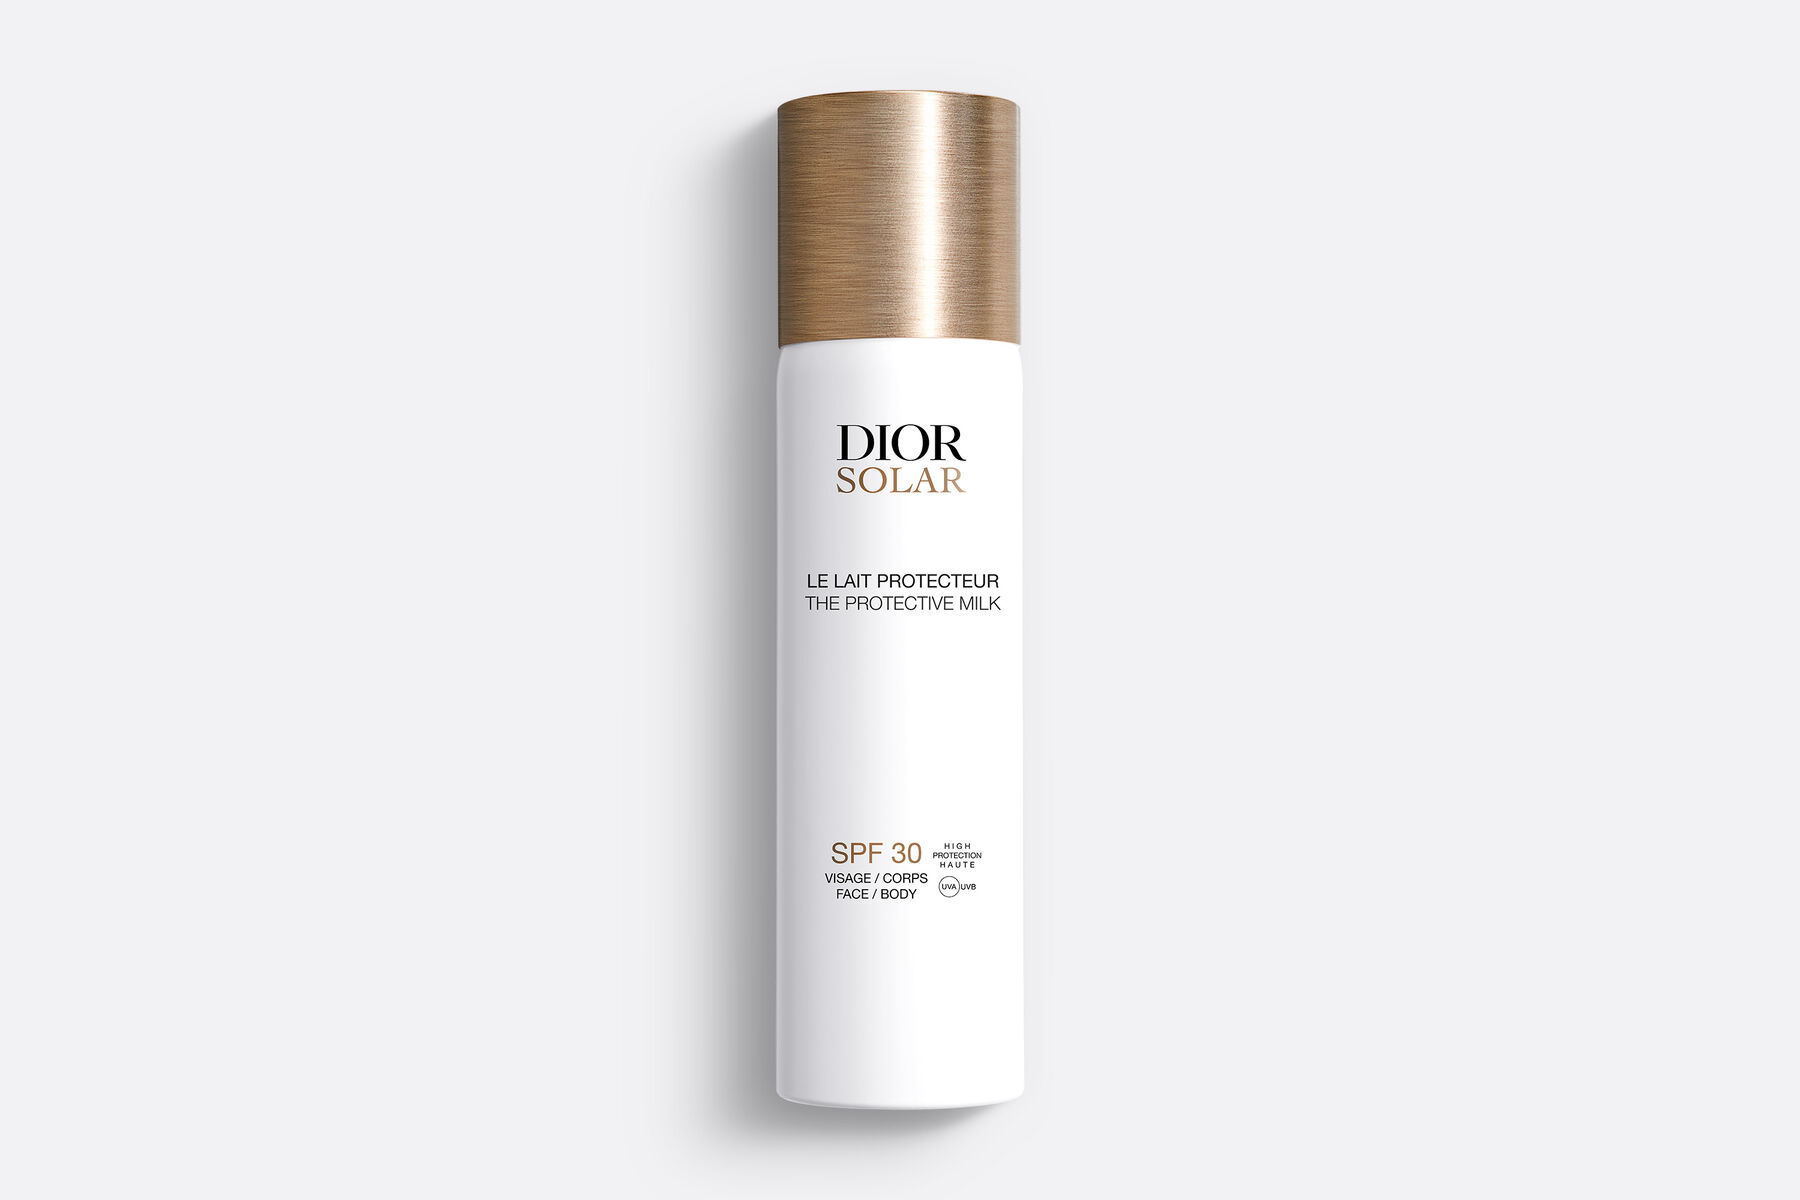 DIOR SOLAR THE PROTECTIVE MILK FOR FACE AND BODY SPF 30